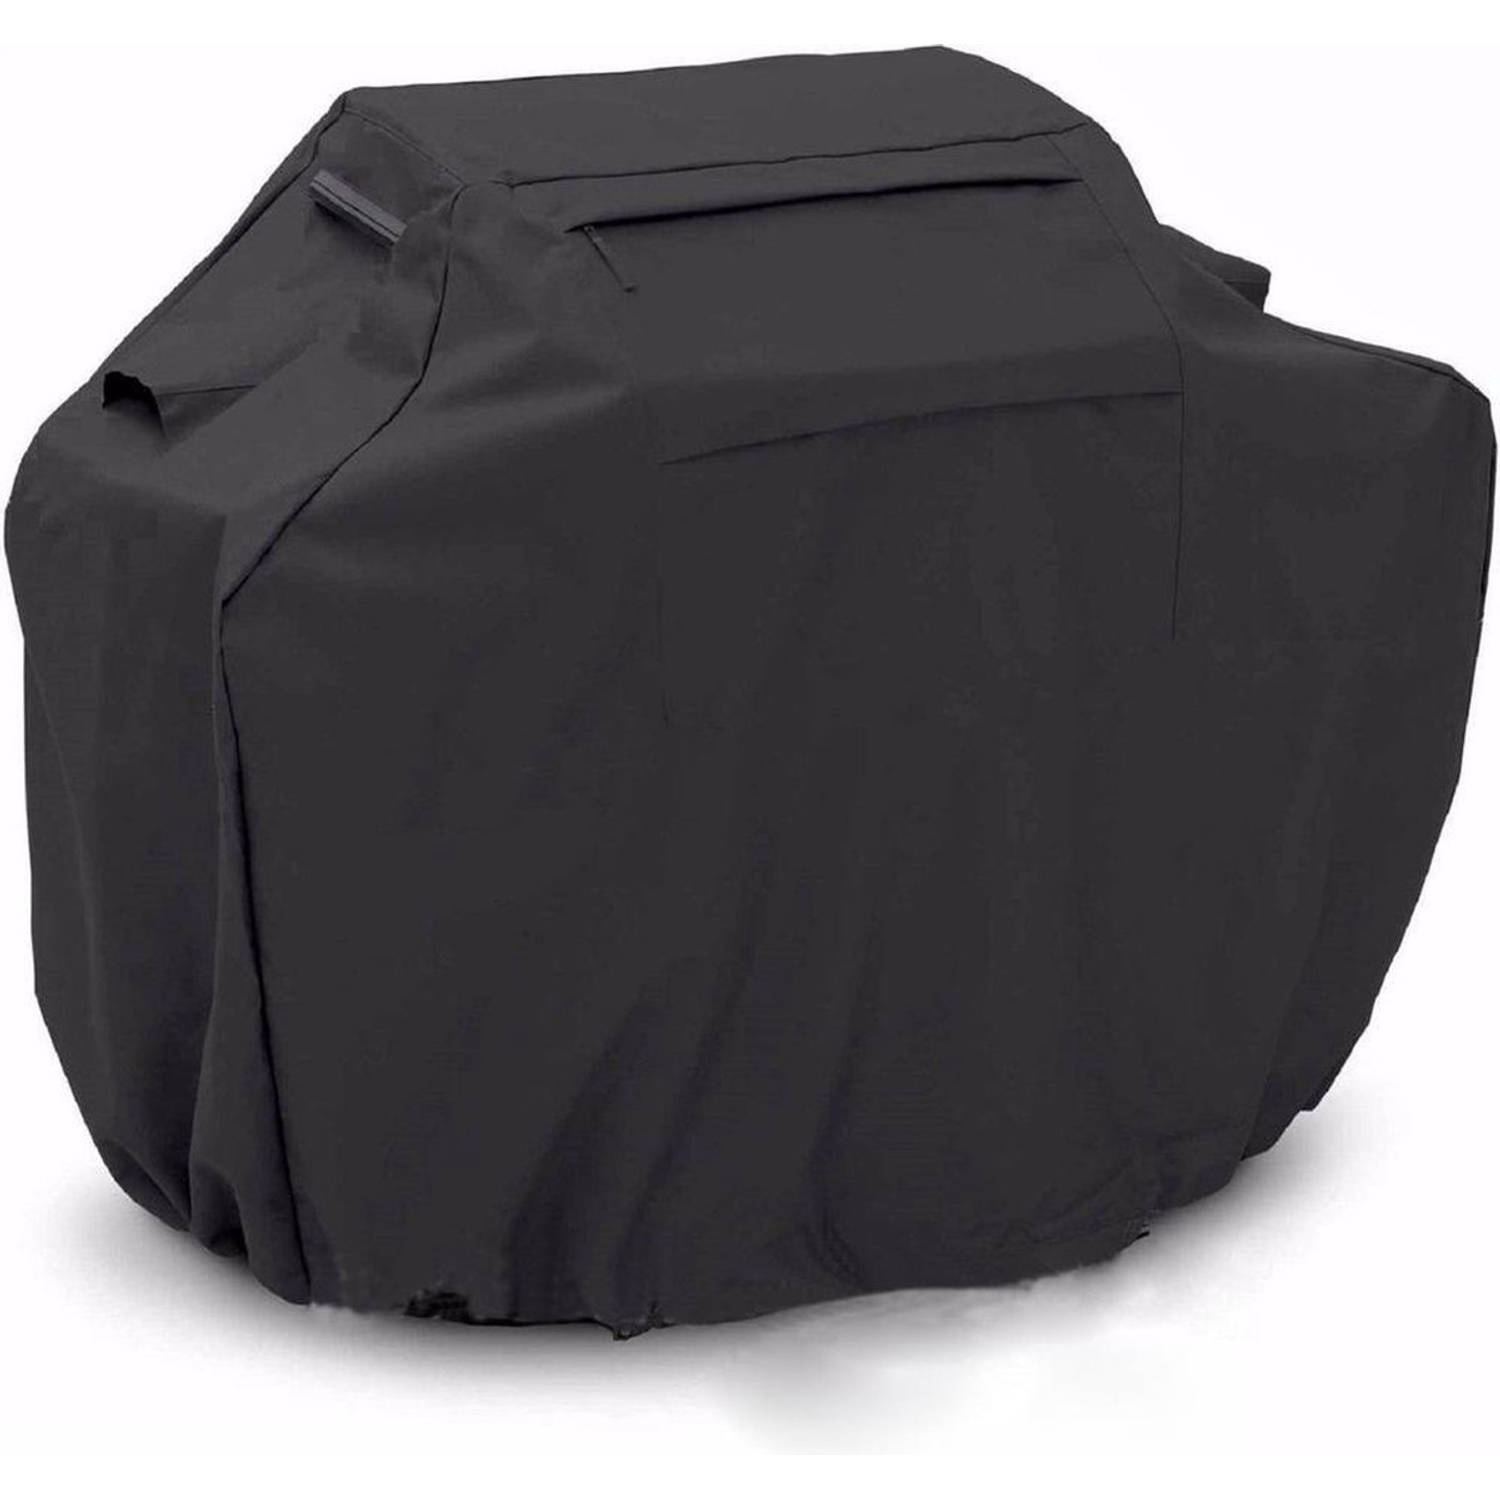 ForDig XL Barbecue Beschermhoes Universeel 150 x 61 x 122 cm Barbecue hoes Afdekhoes BBQ Grill Cover